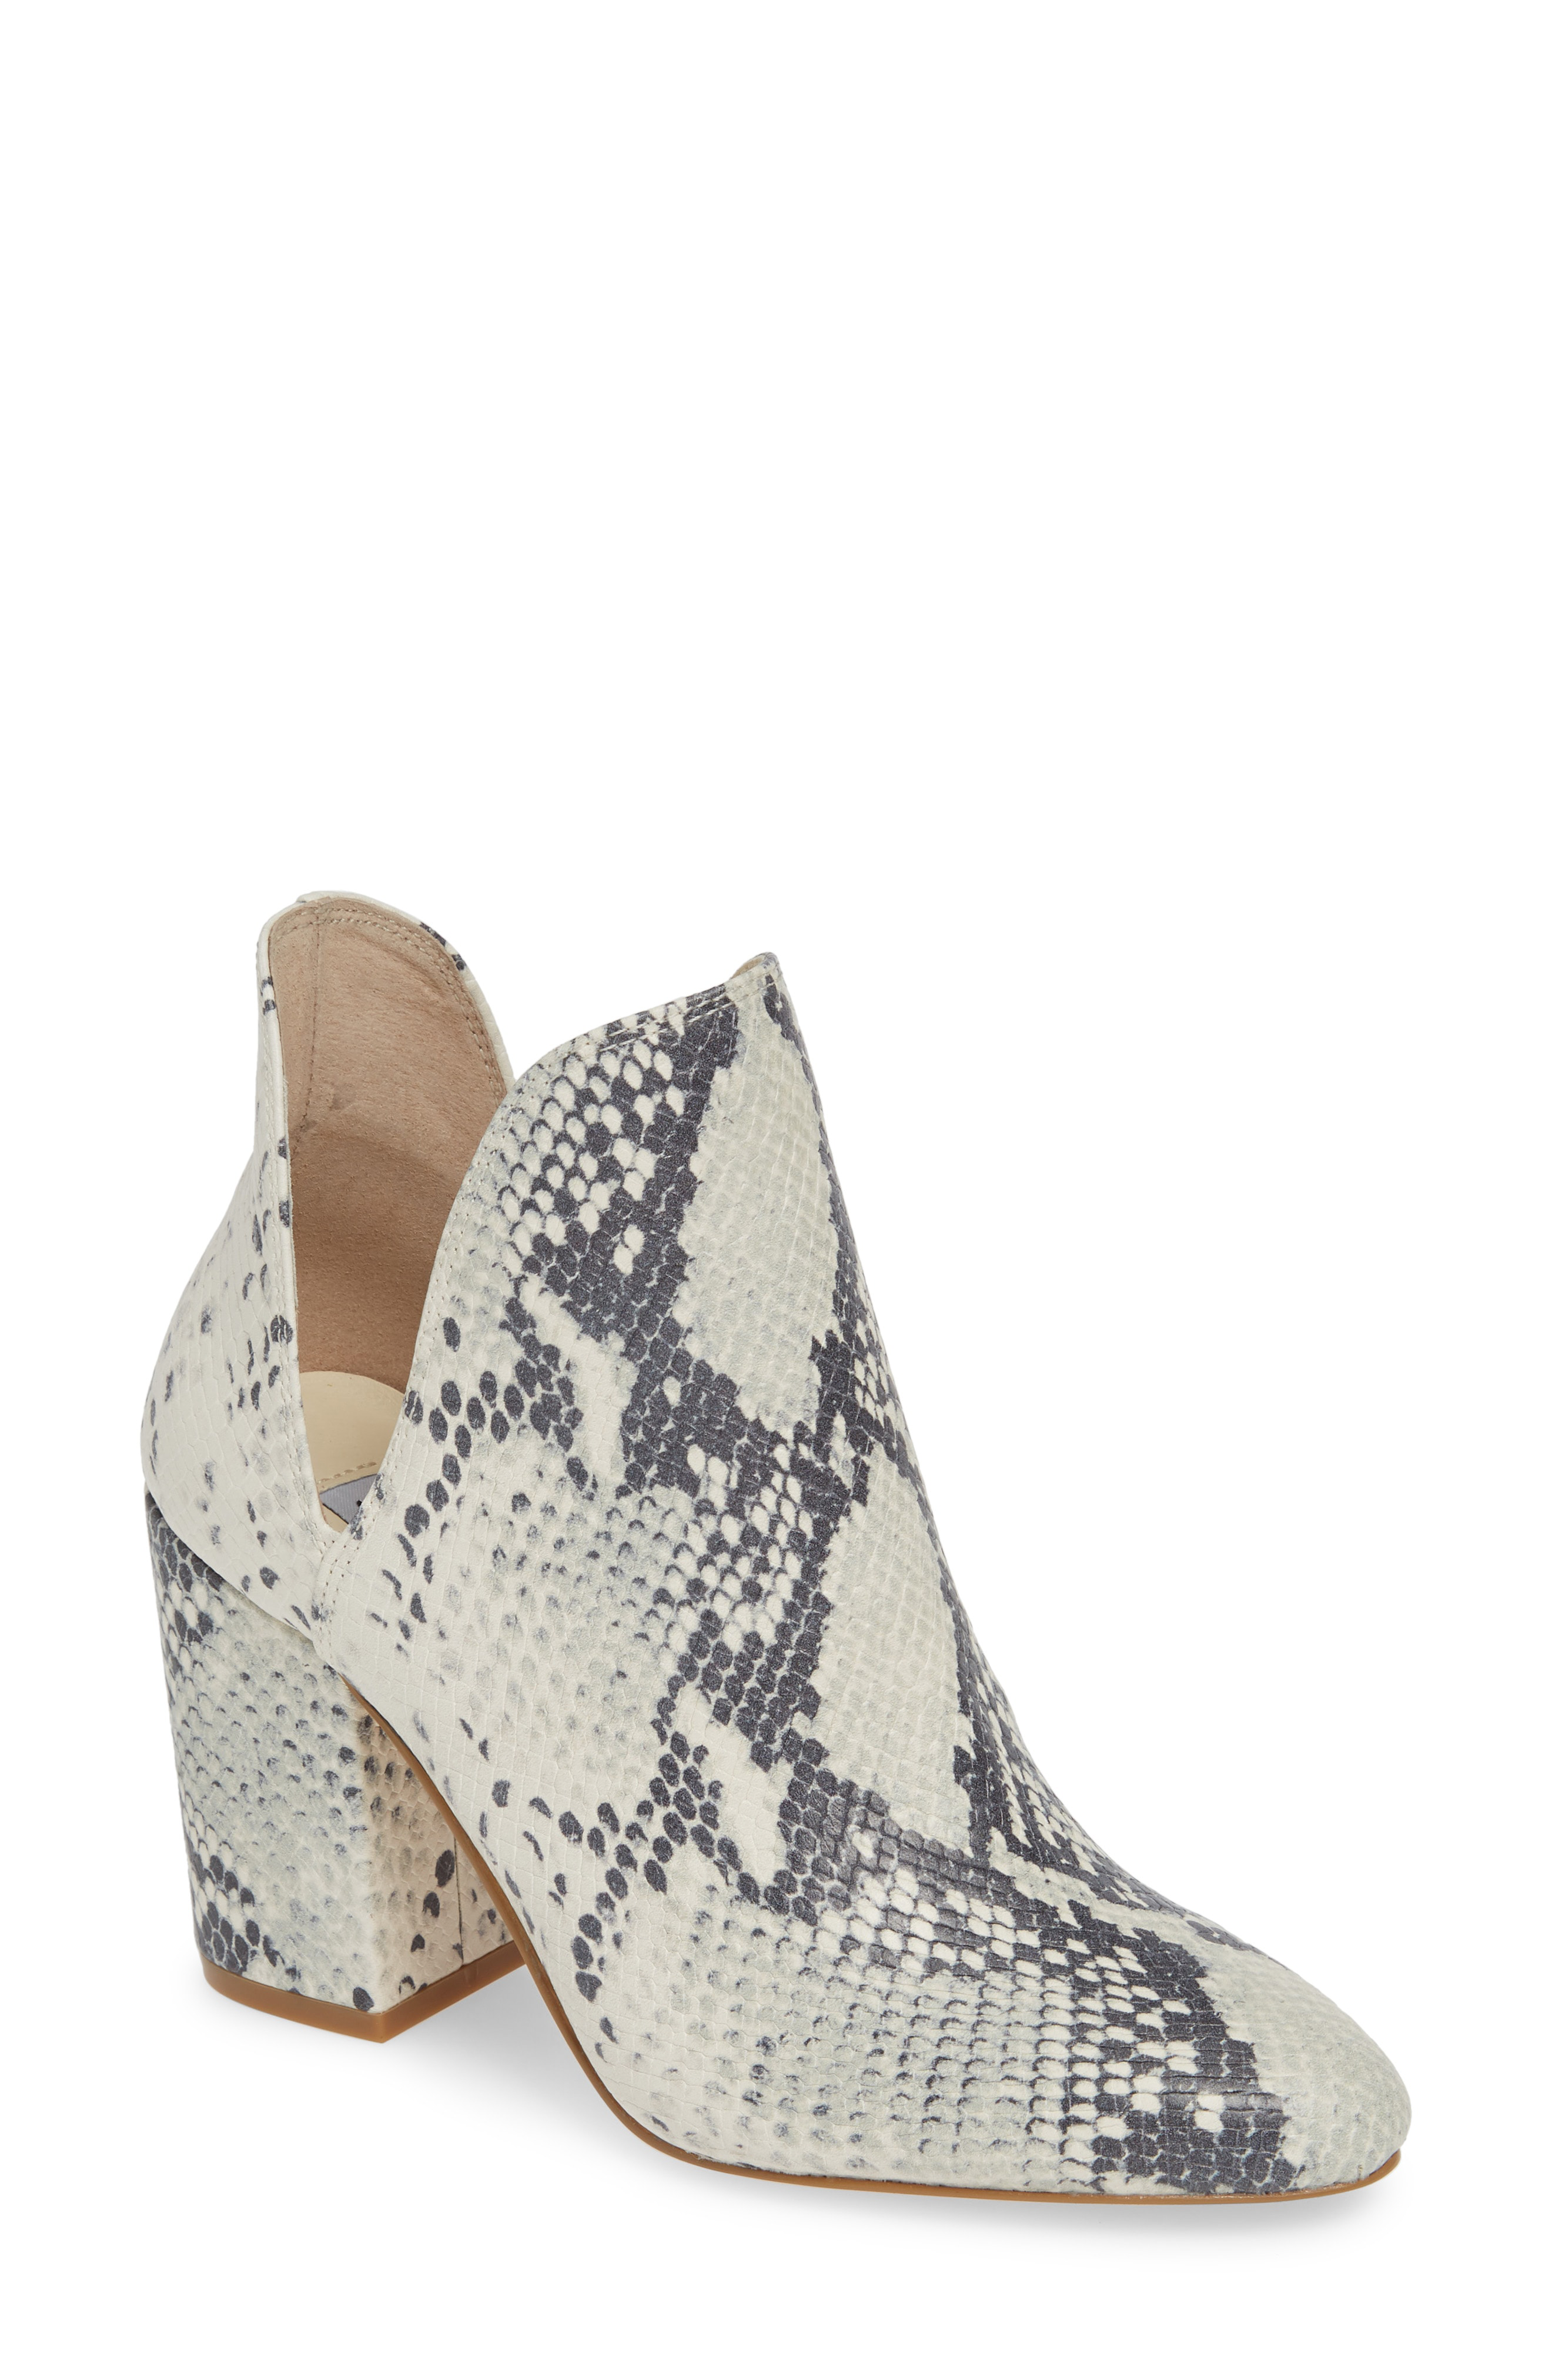 Steve Madden Rookie Bootie In Natural Snake Print | ModeSens